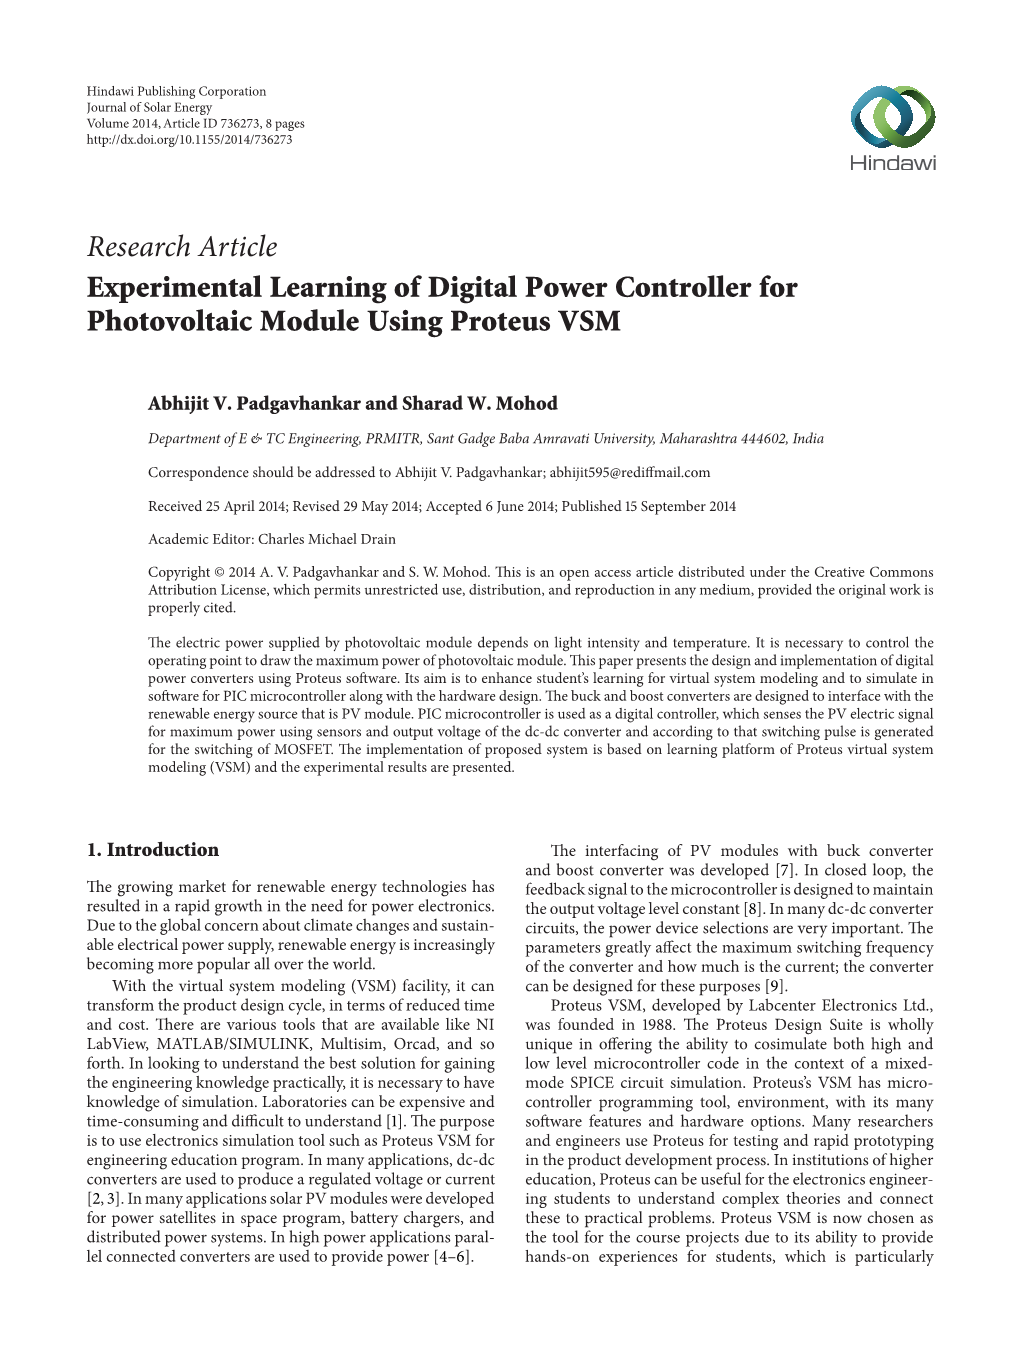 Research Article Experimental Learning of Digital Power Controller for Photovoltaic Module Using Proteus VSM